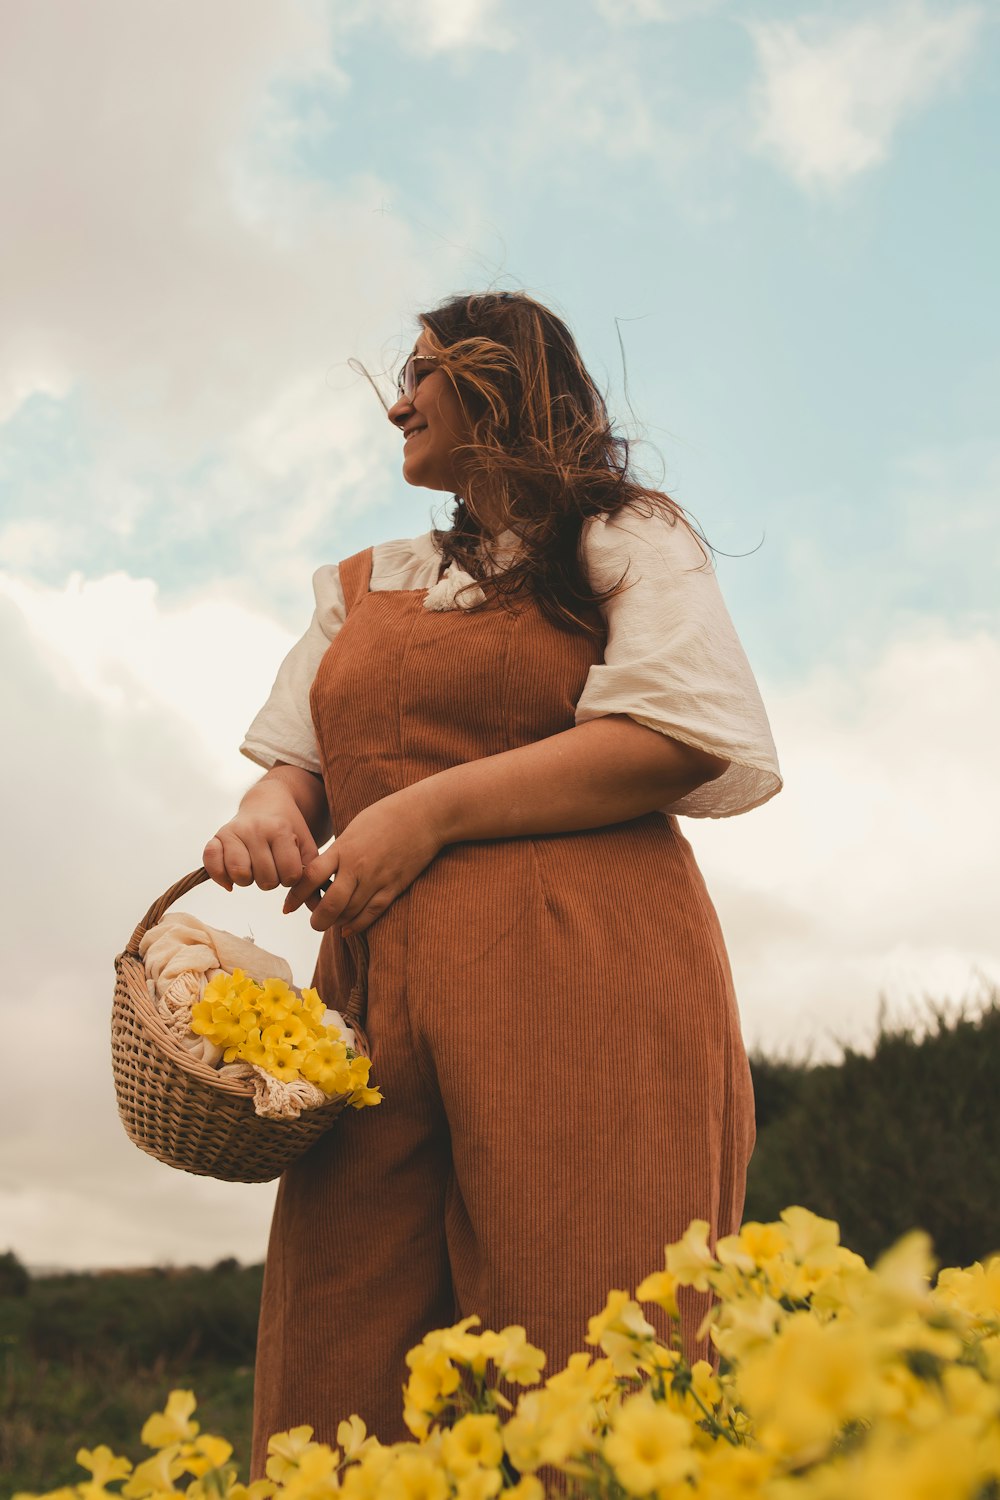 a woman standing in a field holding a basket of flowers